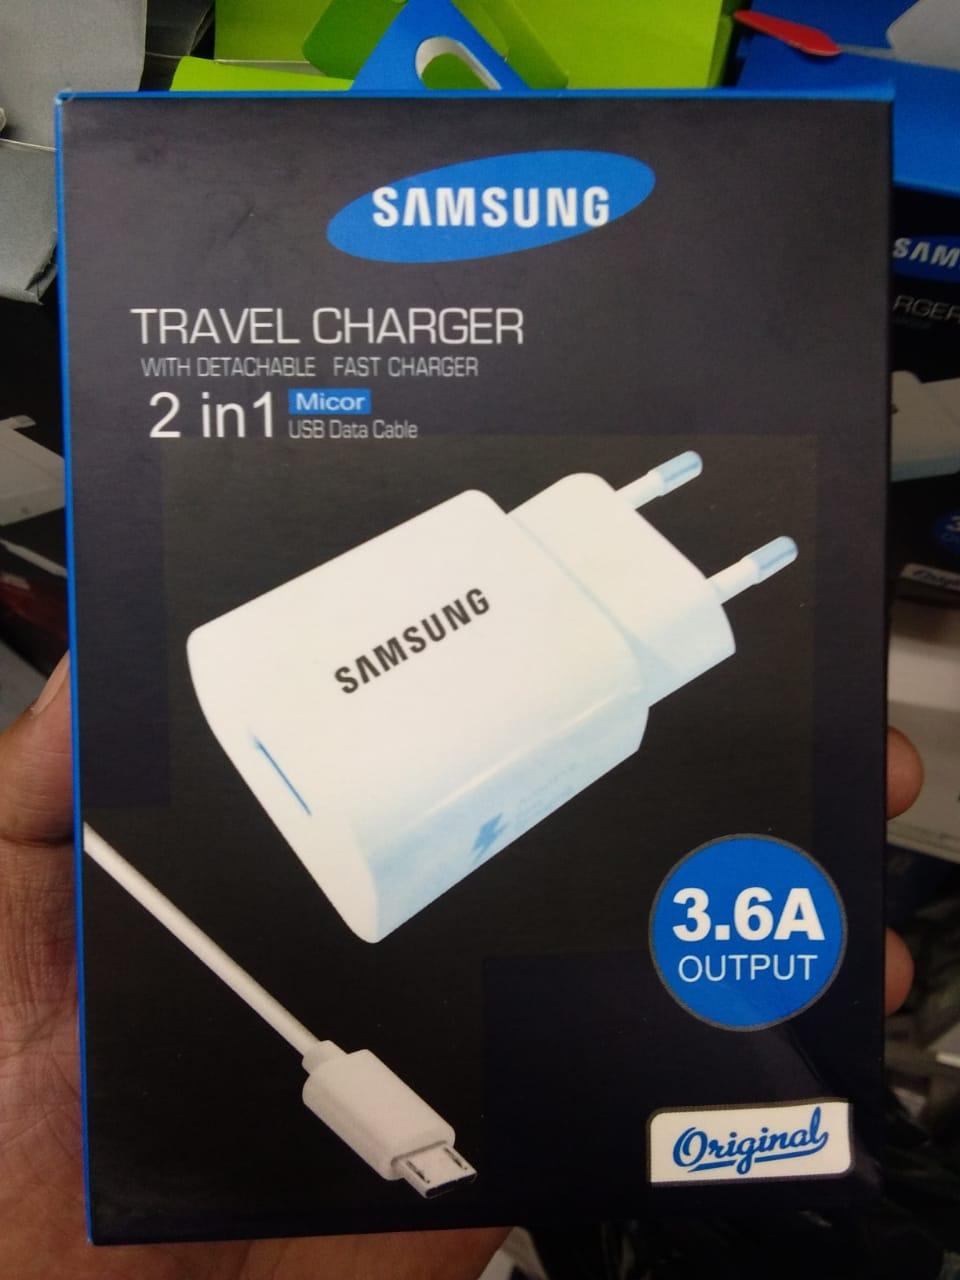 Fast Charger Samsung / Carger Casan Chasan Cash Fast Charger FastCarger FasChager Pengisi daya Fast Charging Cas Samsung For Note NOT 4/S6/S7-EDGE - ARS